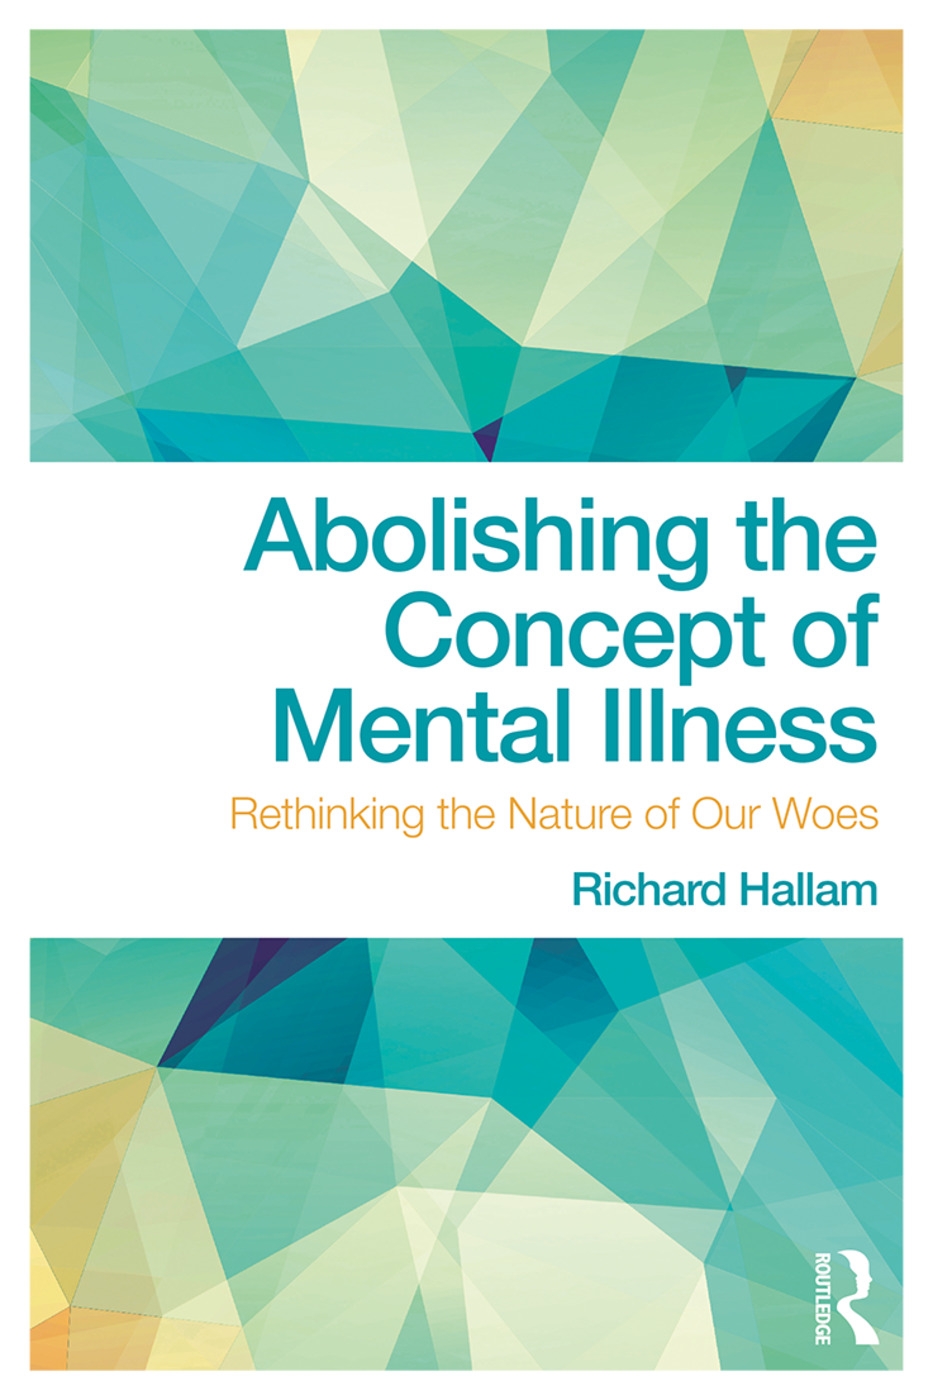 Abolishing the Concept of Mental Illness: Rethinking the Nature of Our Woes